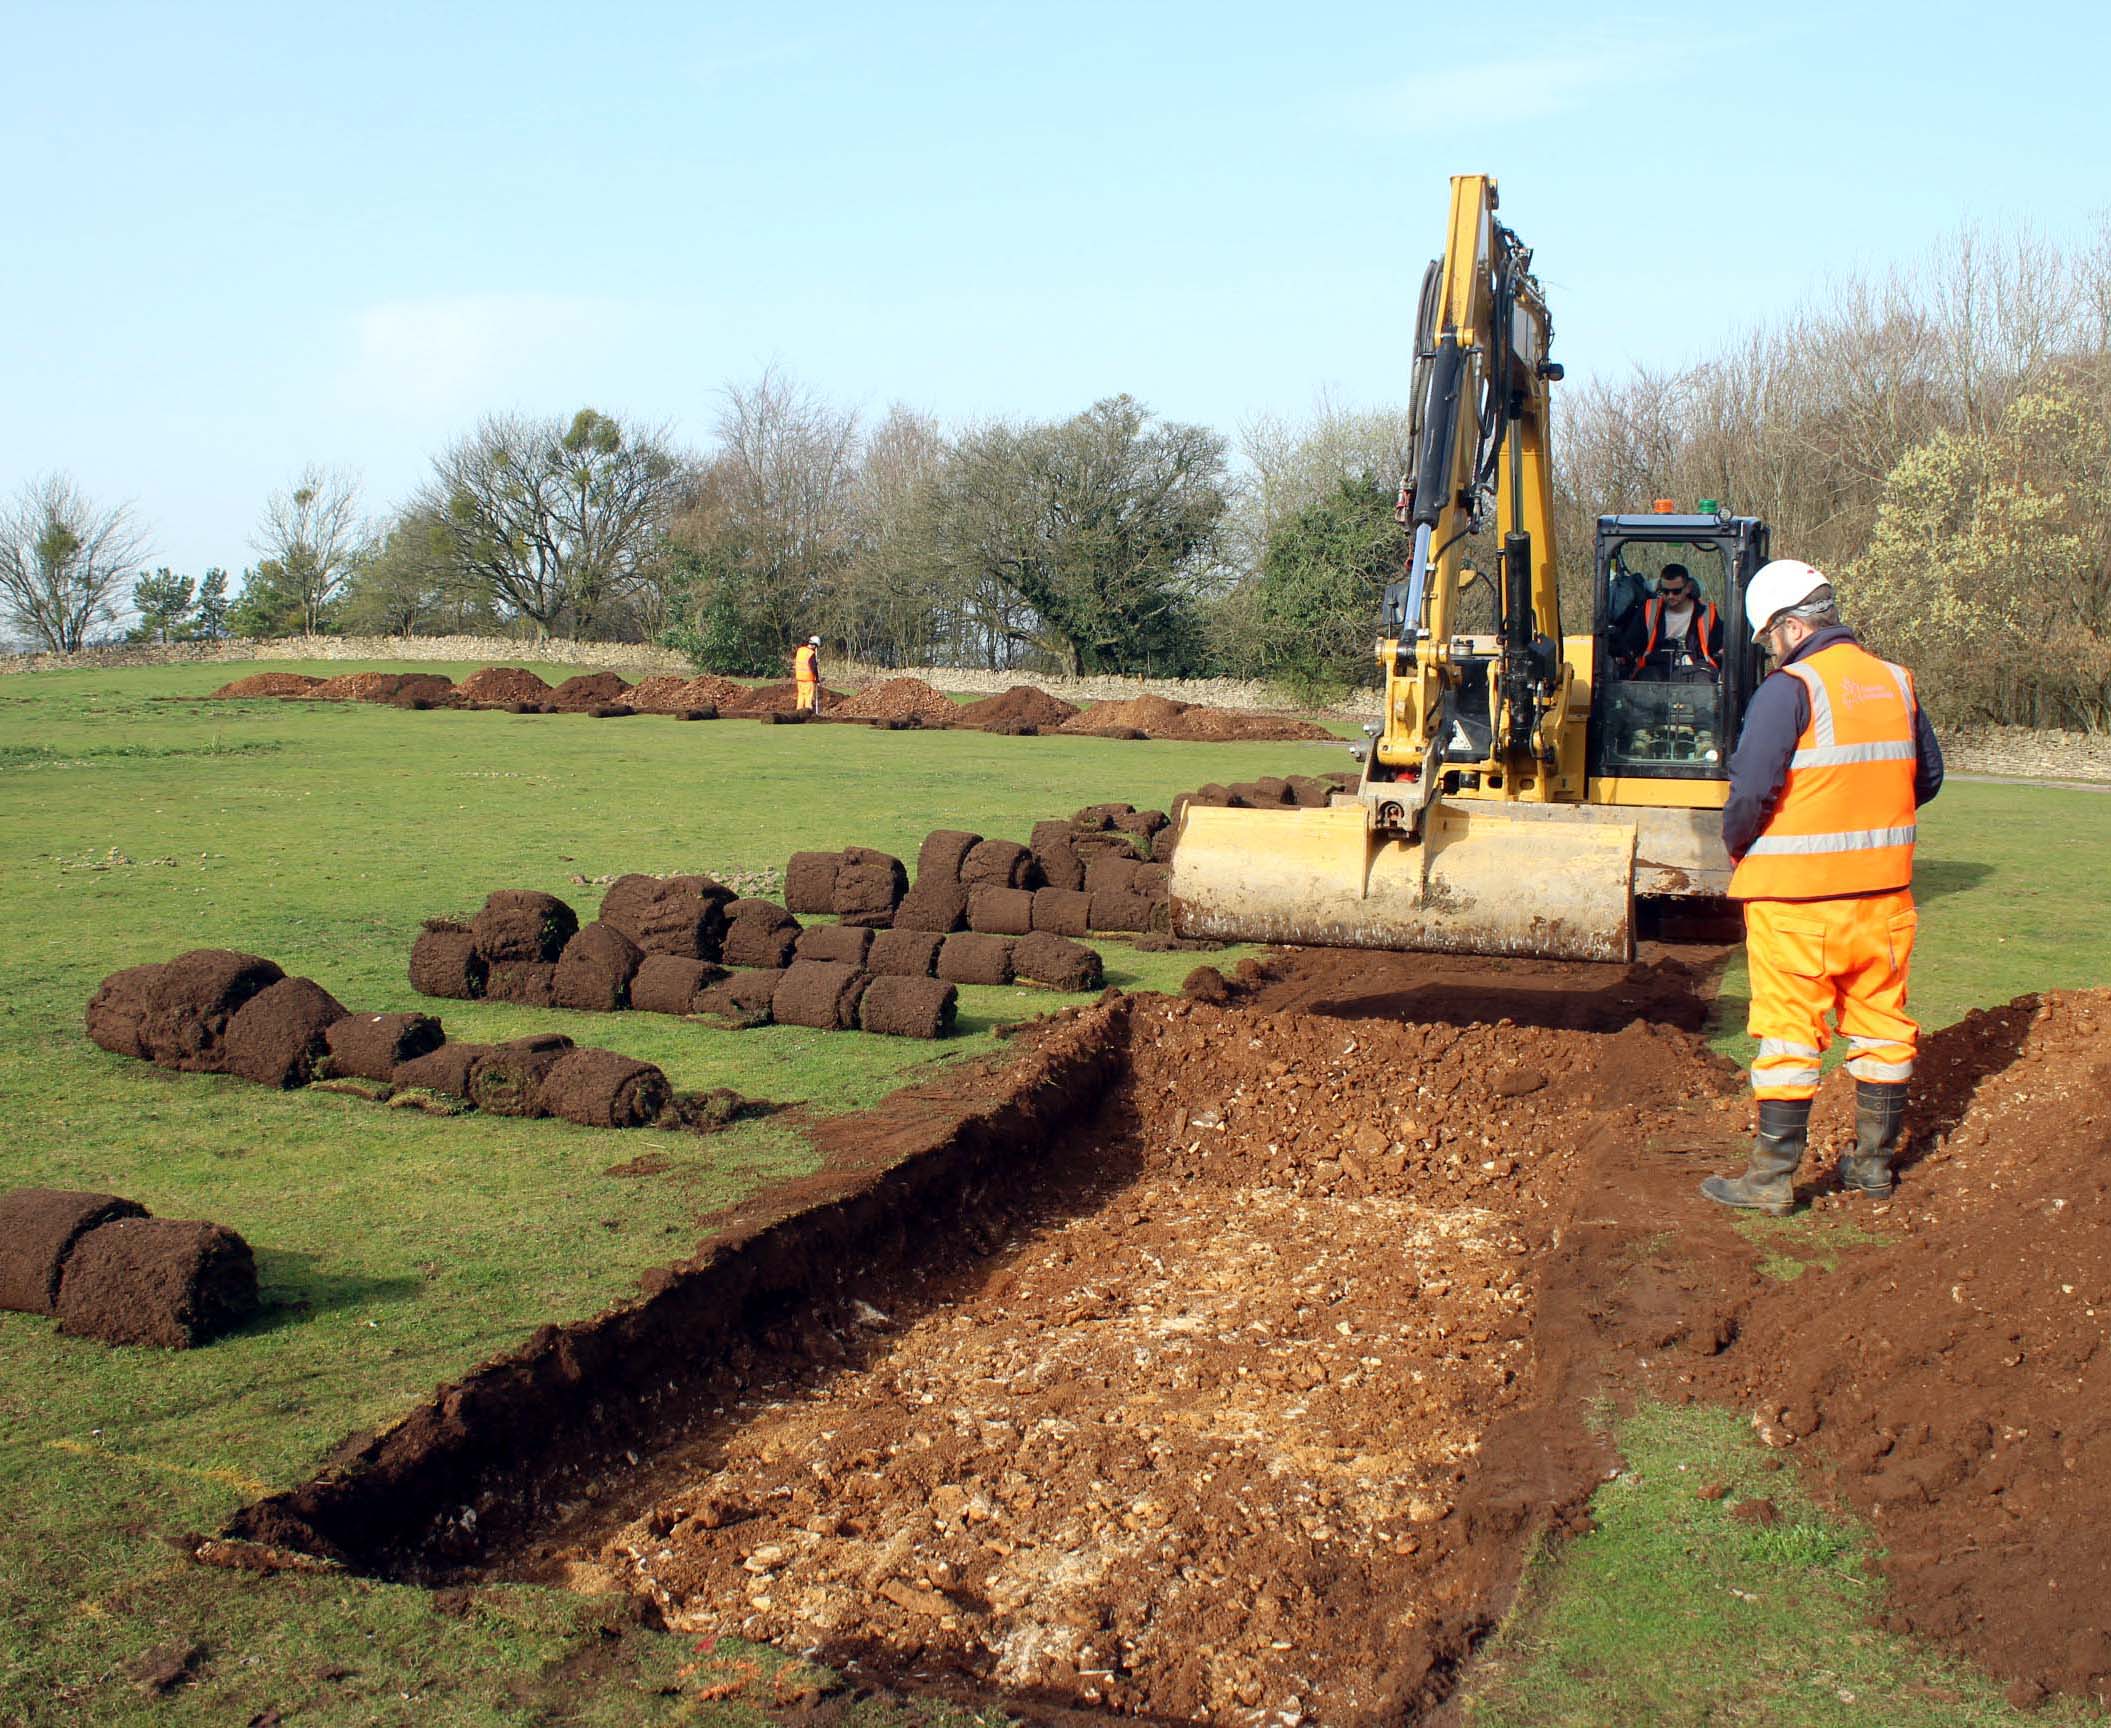 digging trial trenches with machines